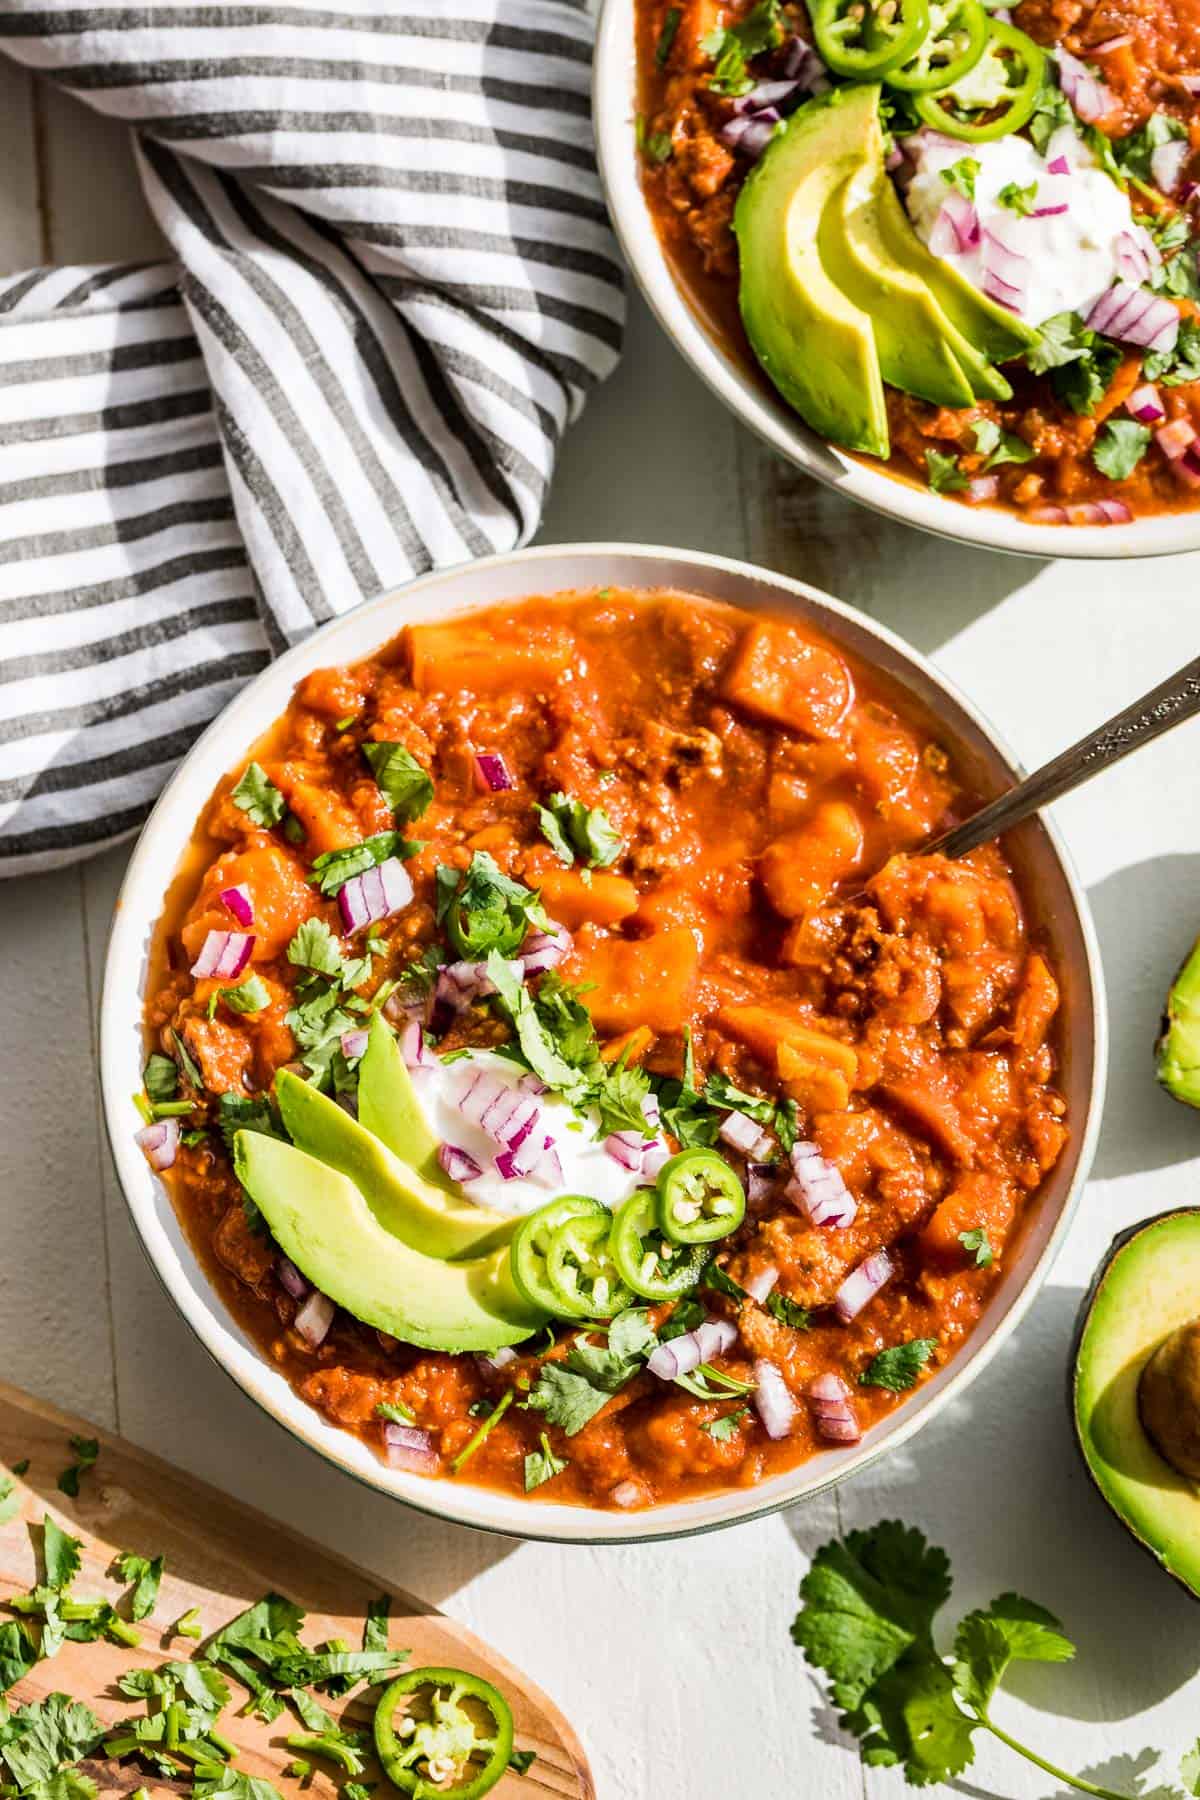 Straight down view of two bowls Whole30 sweet potato chili topped with avocado slices, cilantro, and jalapeno slice.